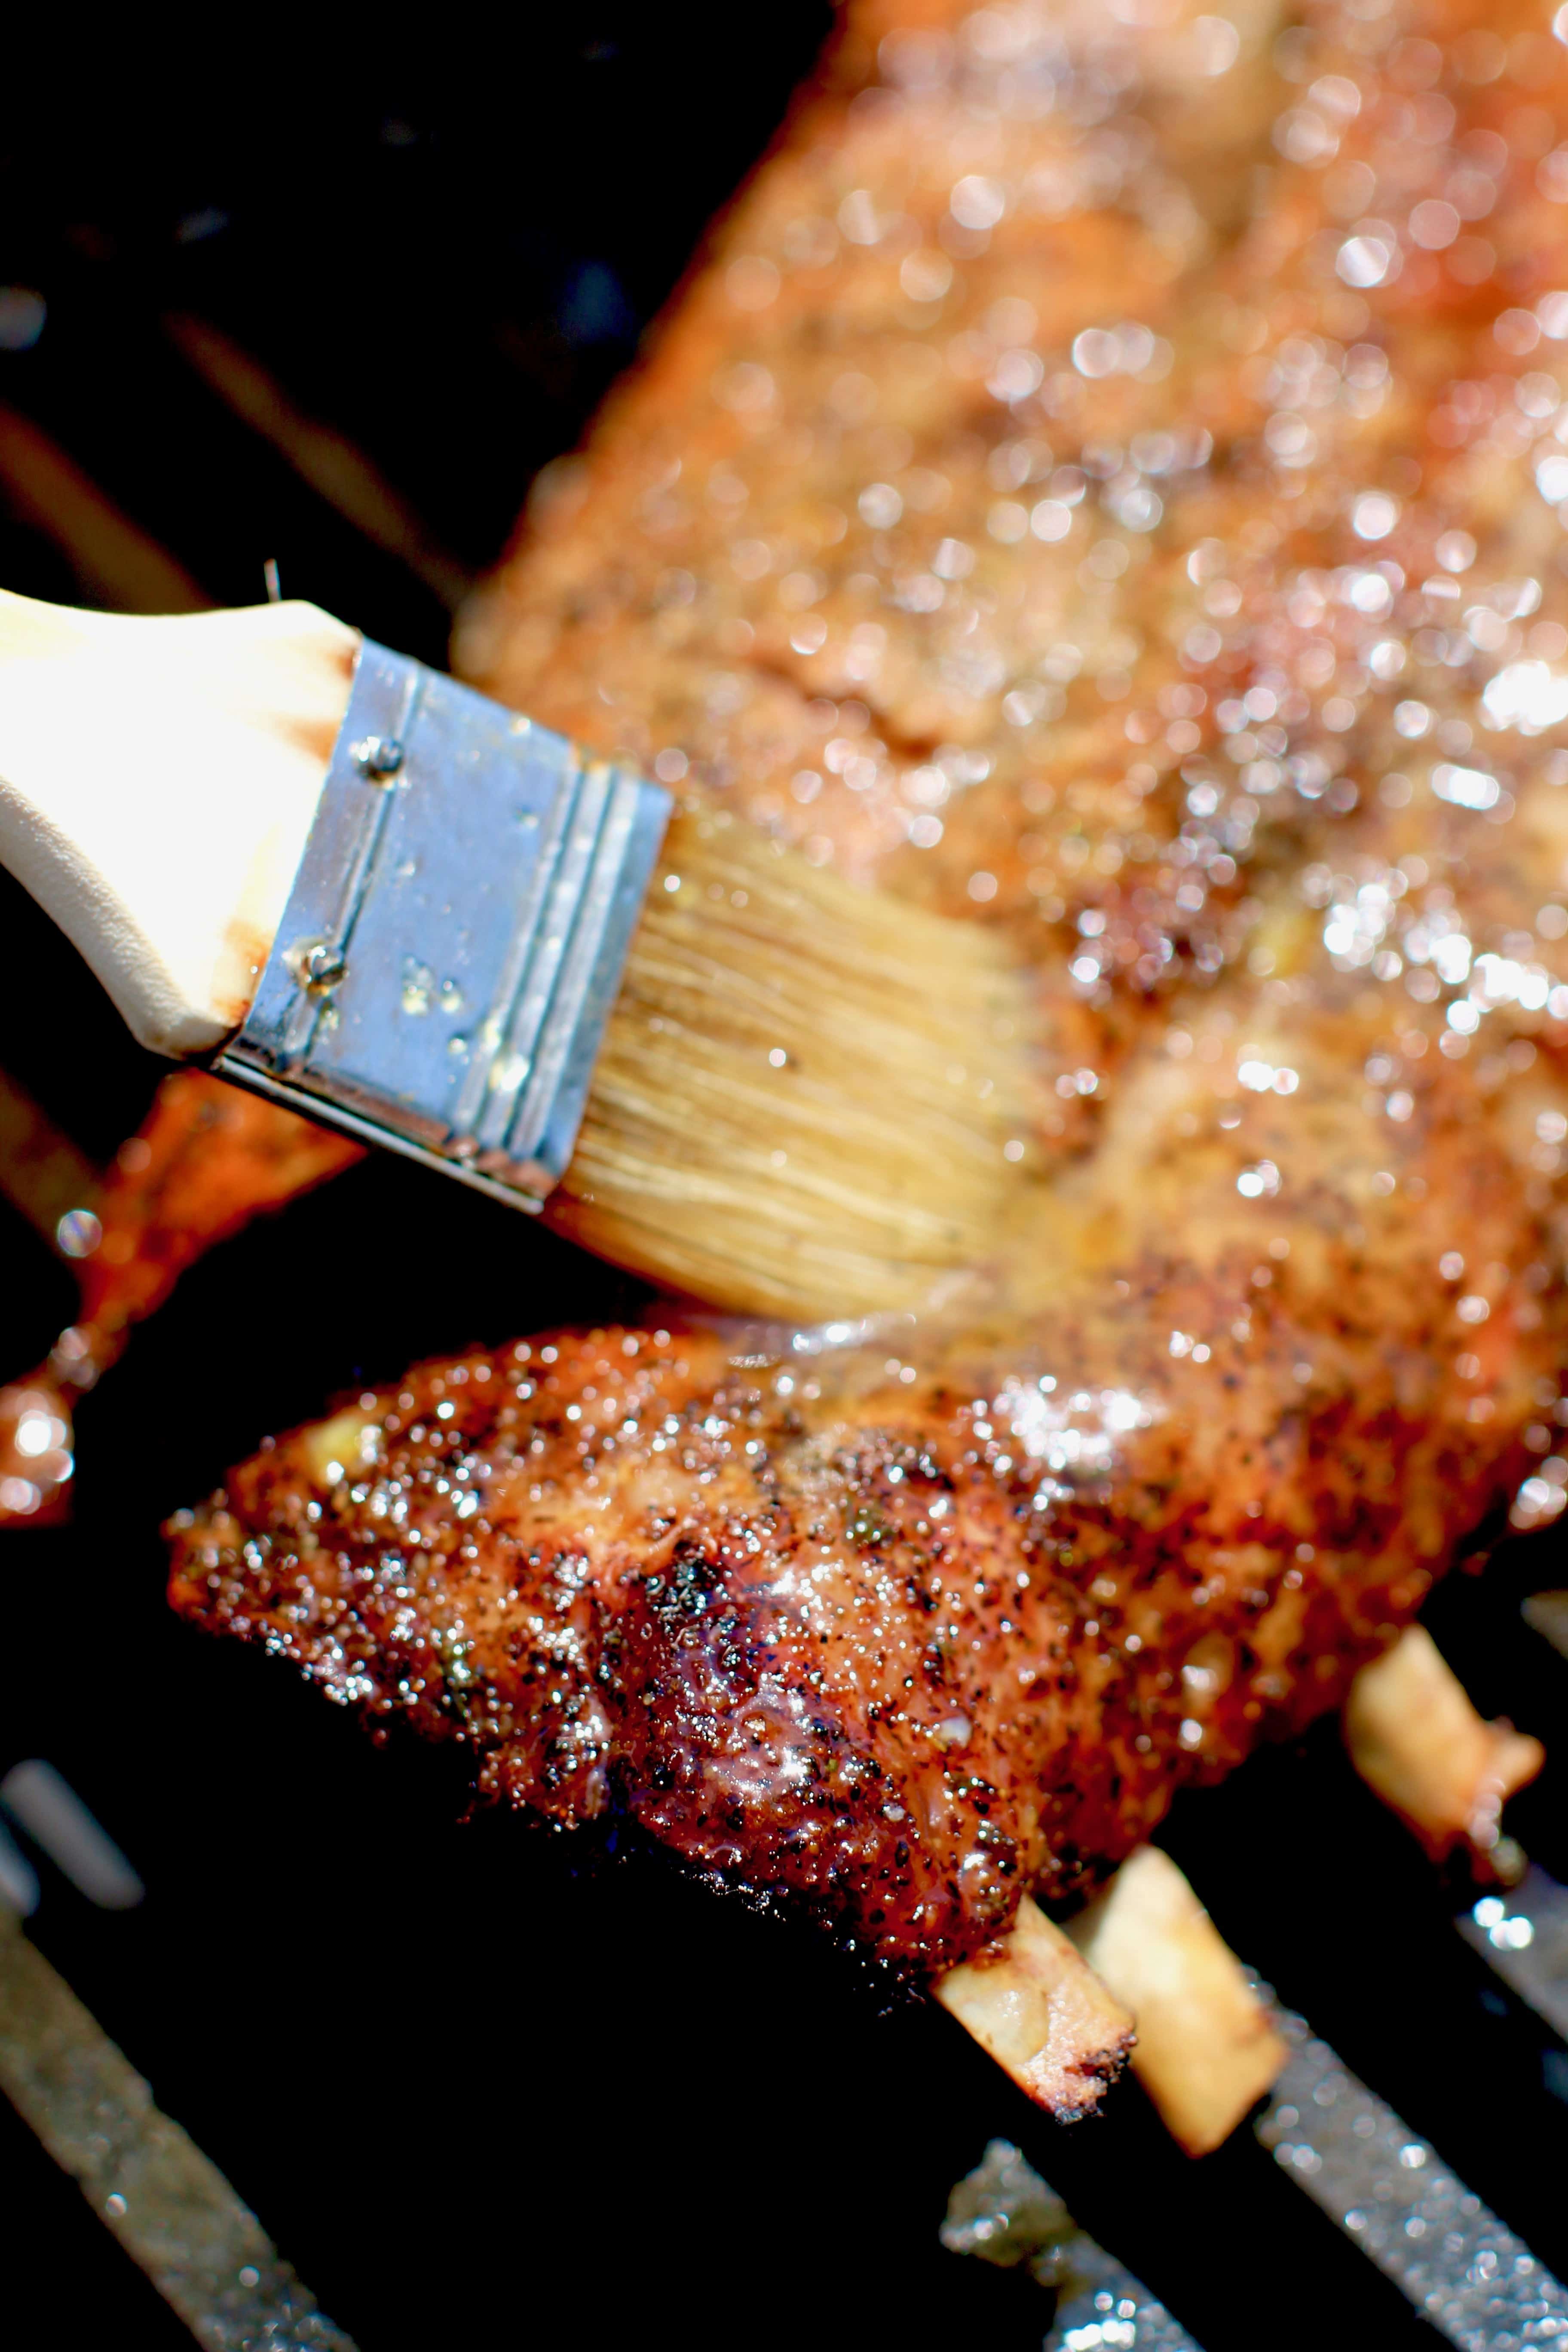 Pork ribs being slathered with glaze on a gas grill